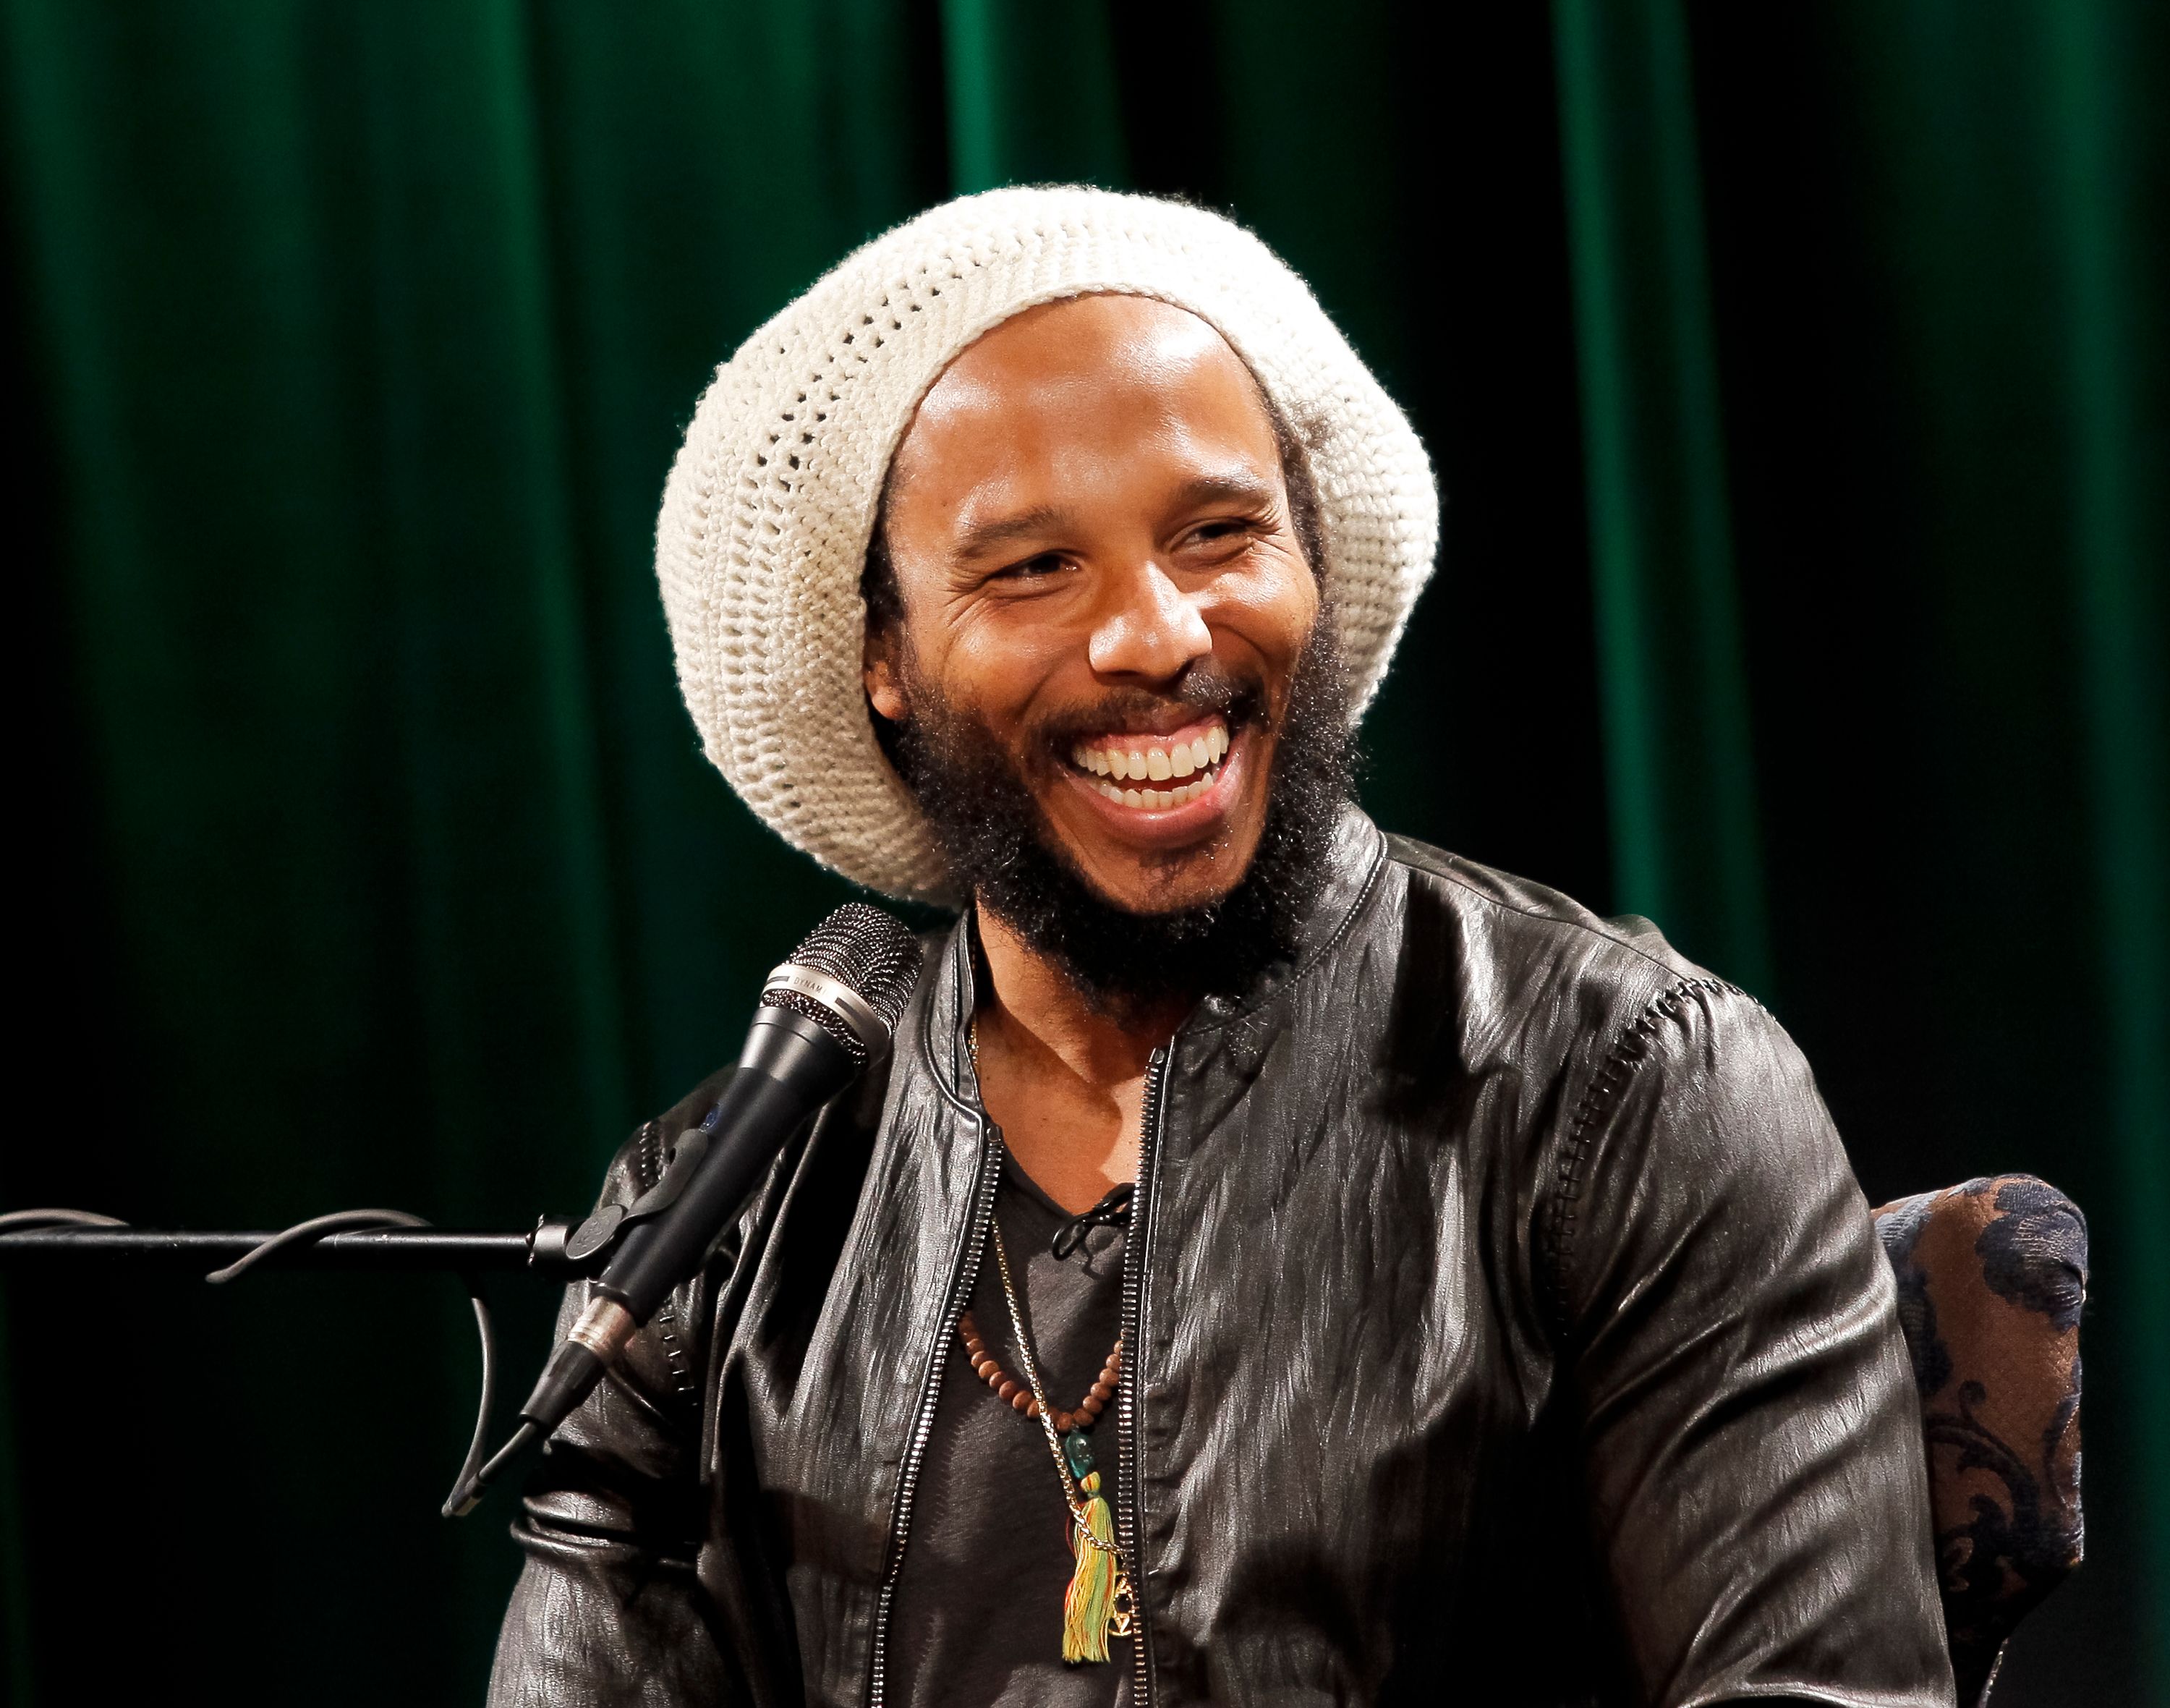 Ziggy Marley at the Q&A and screening for the film "Bob Marley & The Wailers: Easy Skanking in Boston '78" on February 18, 2015  | Photo: Getty Images